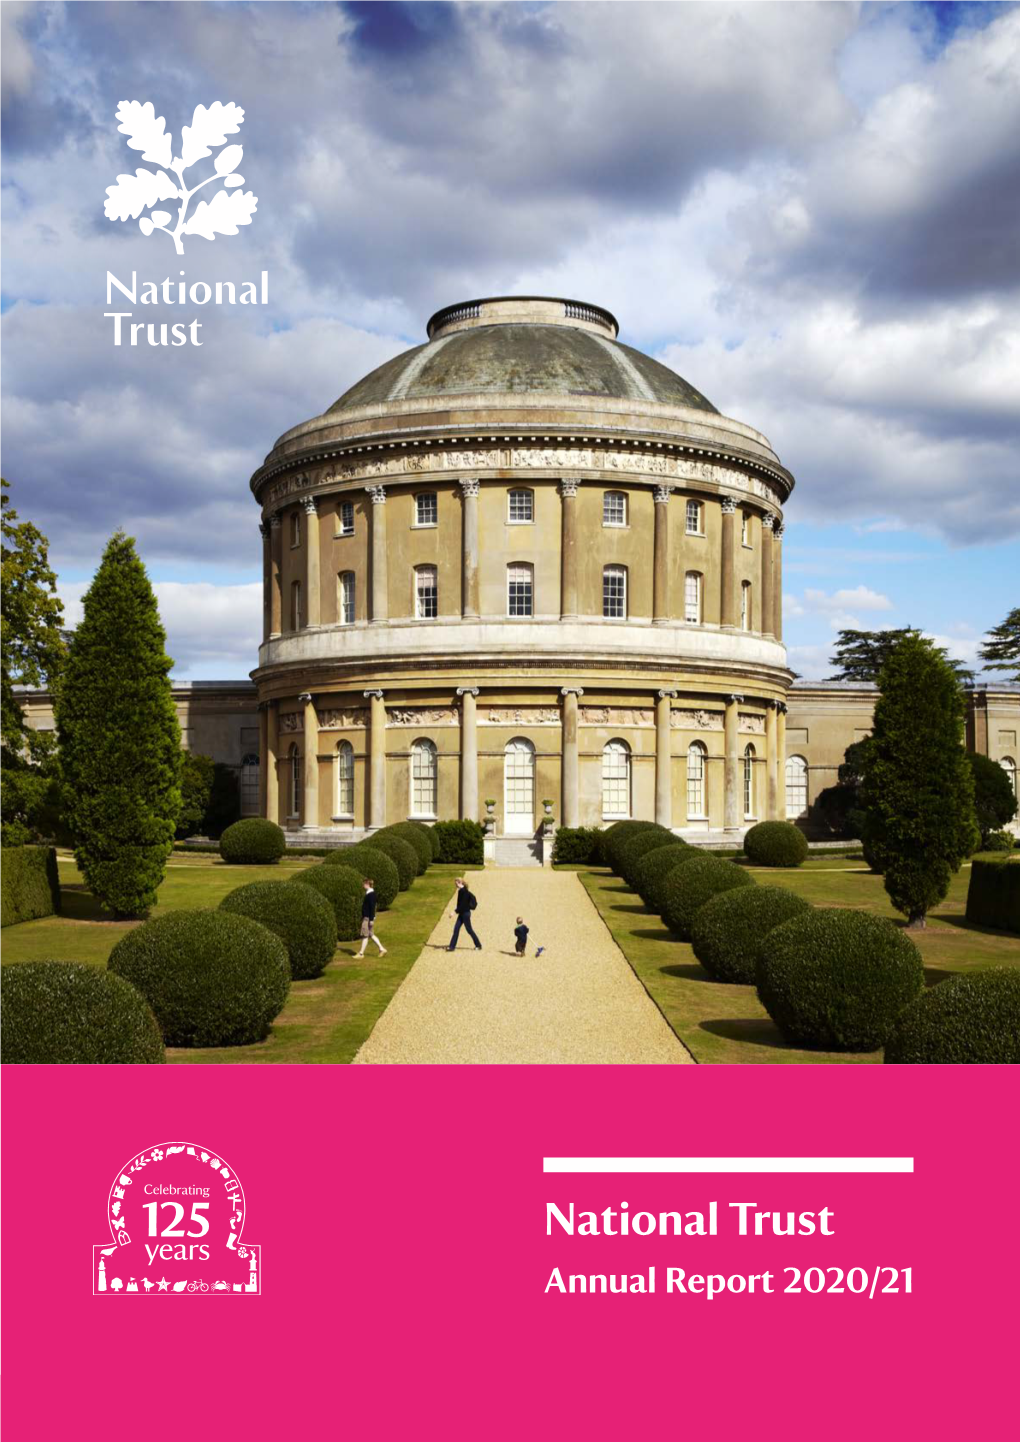 National Trust Annual Report 2020/21